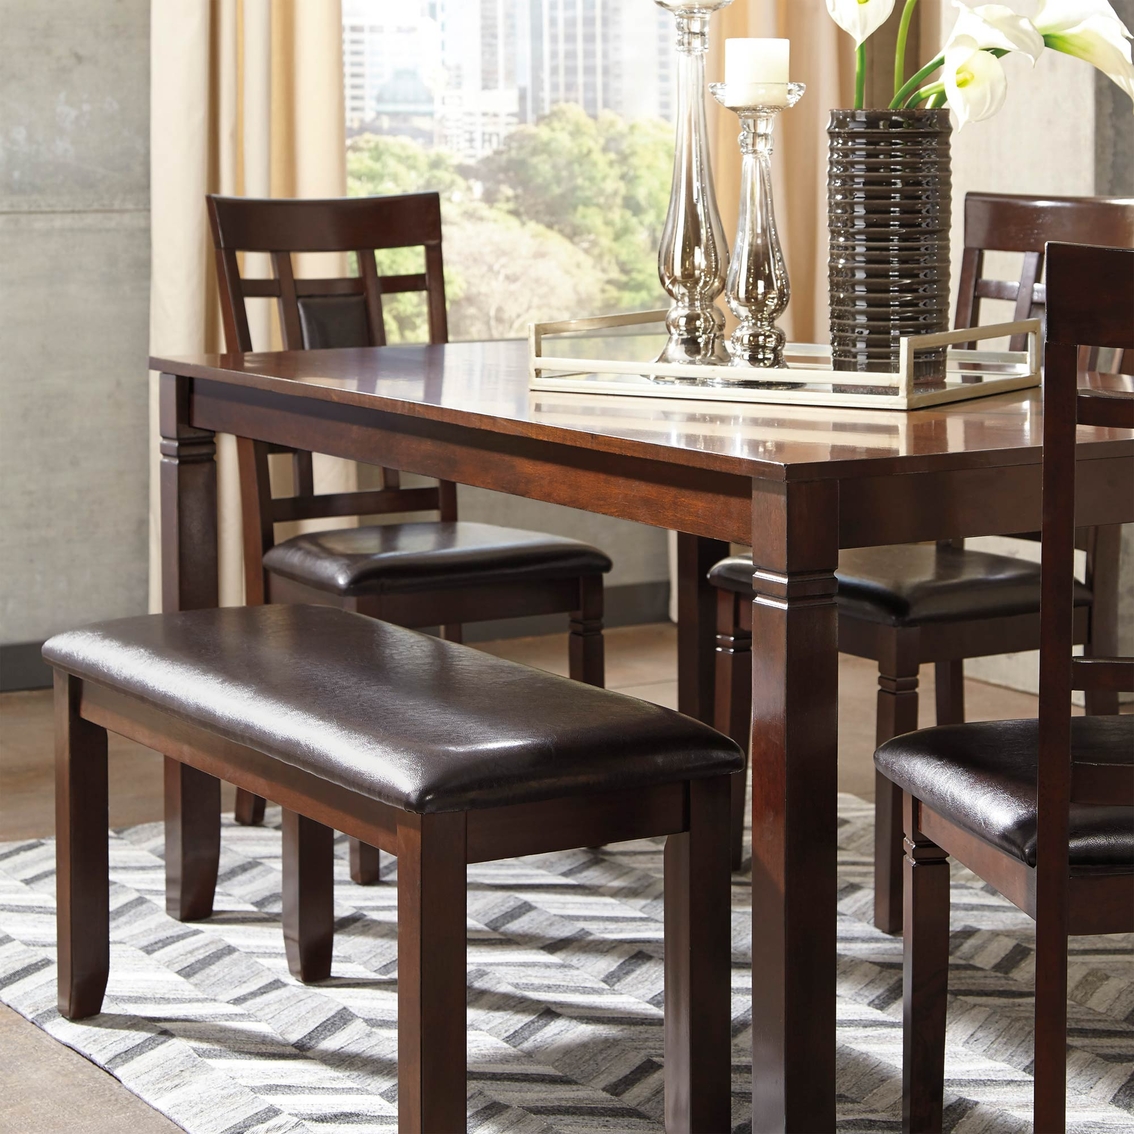 Ashley Bennox Dining Room Table Set, Ashley Furniture Bennox Dining Table And Chairs With Bench